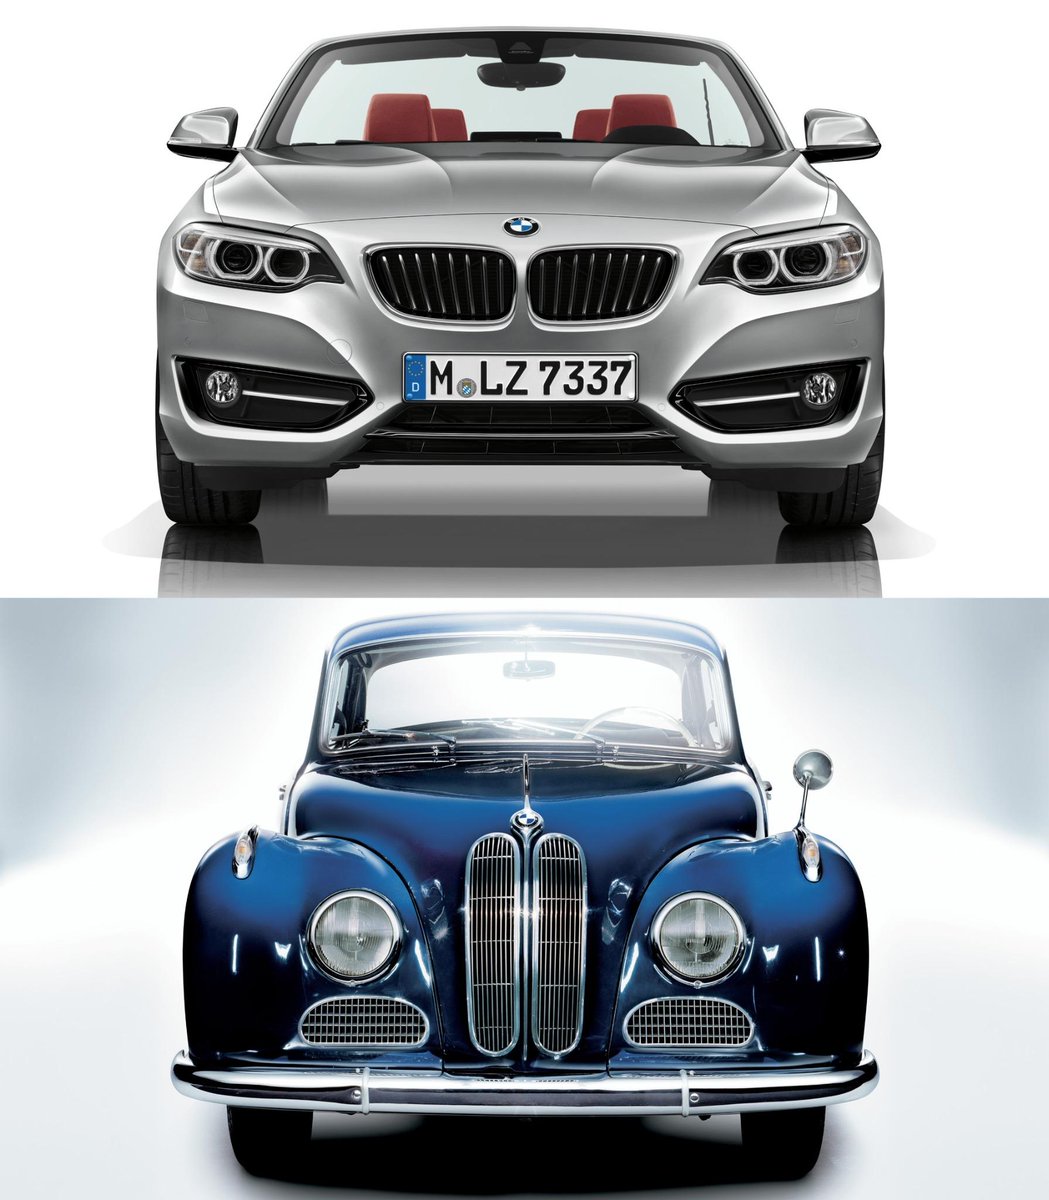 BMW on Twitter: "The #BMW grille a hallmark of all cars and symbolises the direct link to the engine. http://t.co/6R0N4c26XU" / Twitter